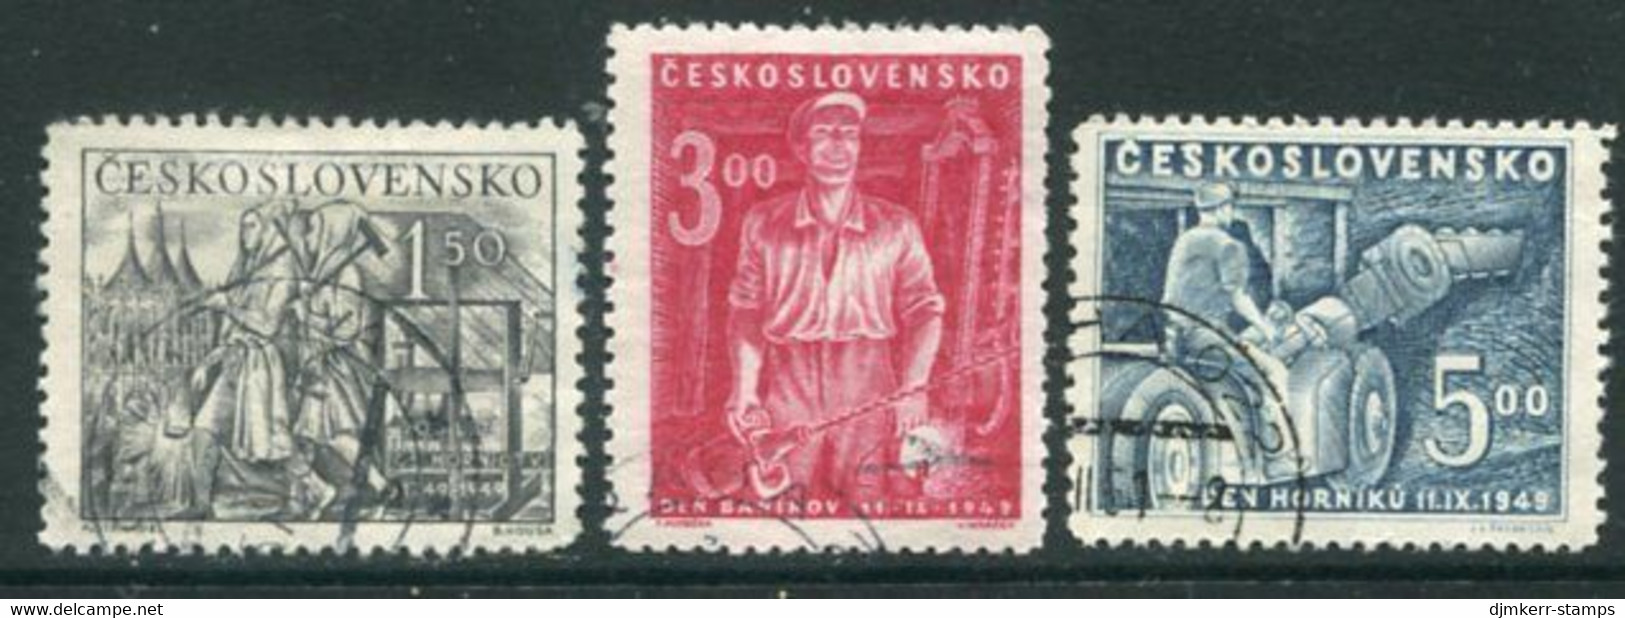 CZECHOSLOVAKIA 1949 700th Anniversary Of Mining Used.  Michel 594-96 - Used Stamps